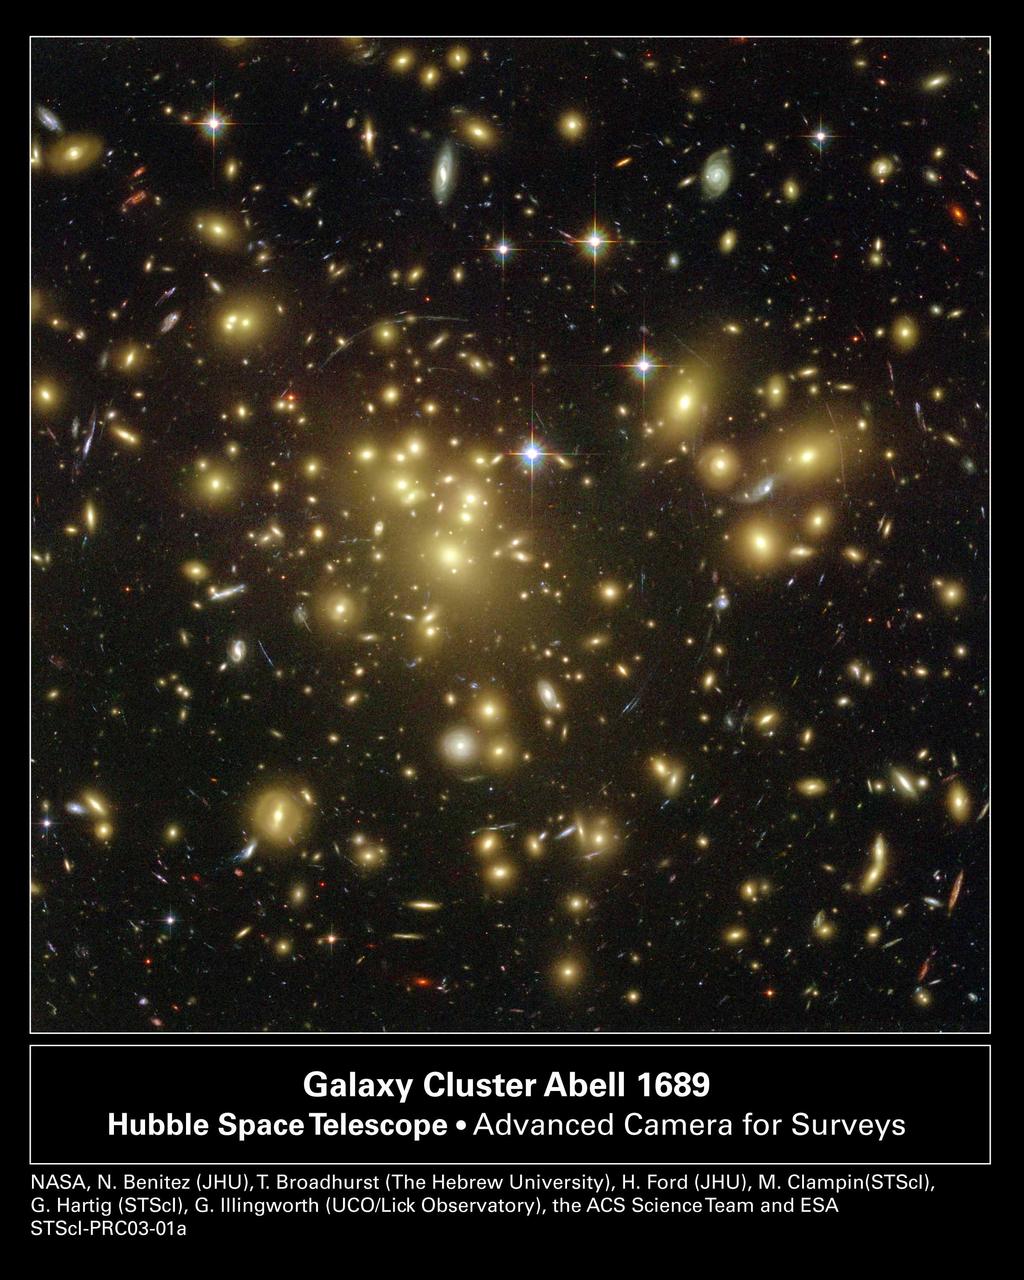 Gravitational Lensing in a Rich Cluster.